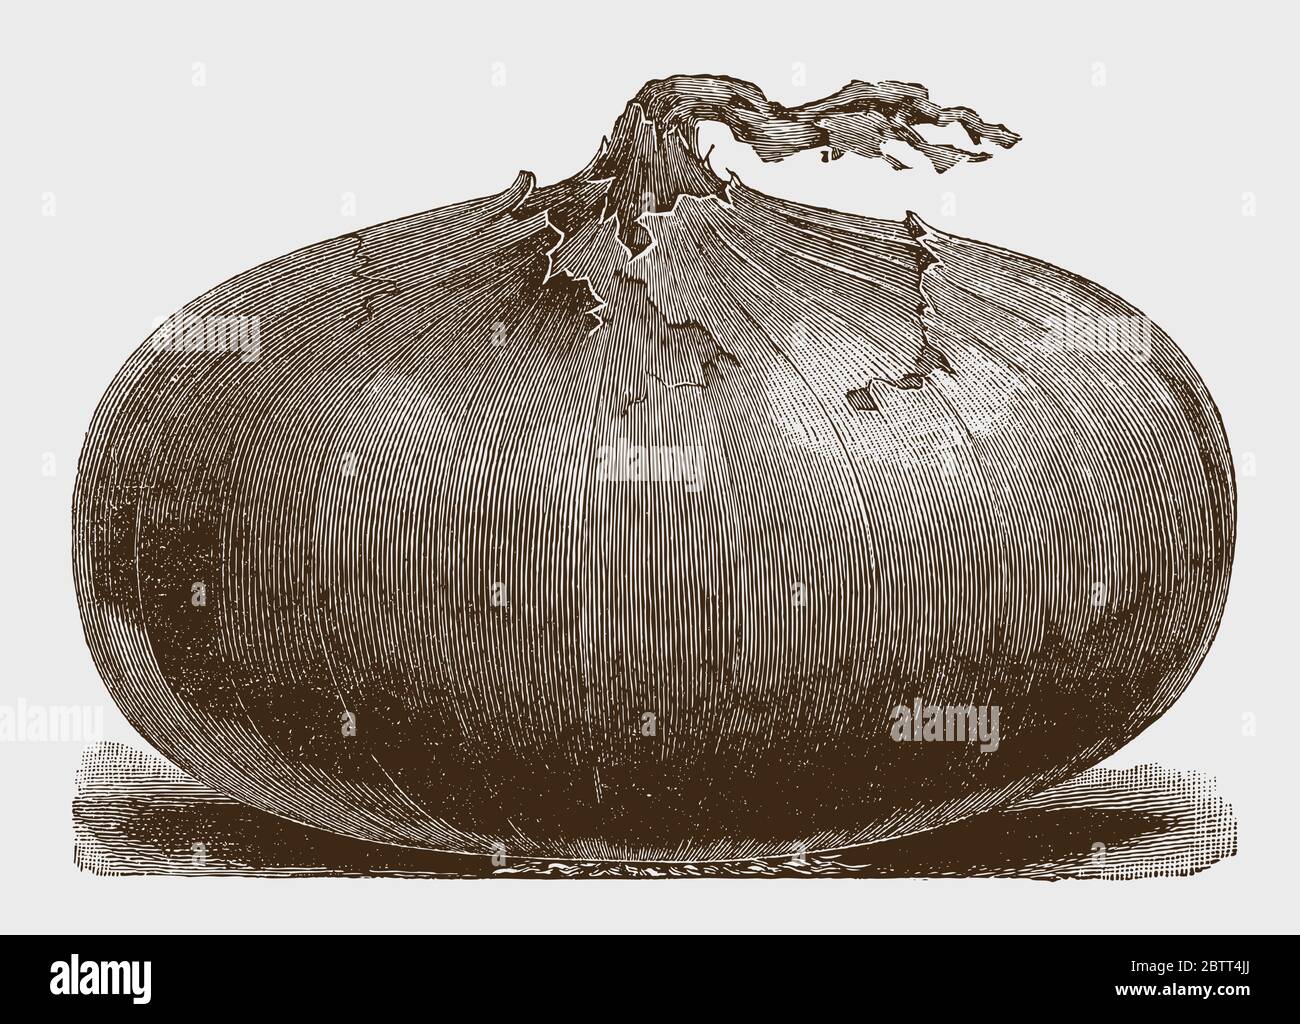 Large, flattened onion in side view, after a historical engraving from the early 20th century Stock Vector